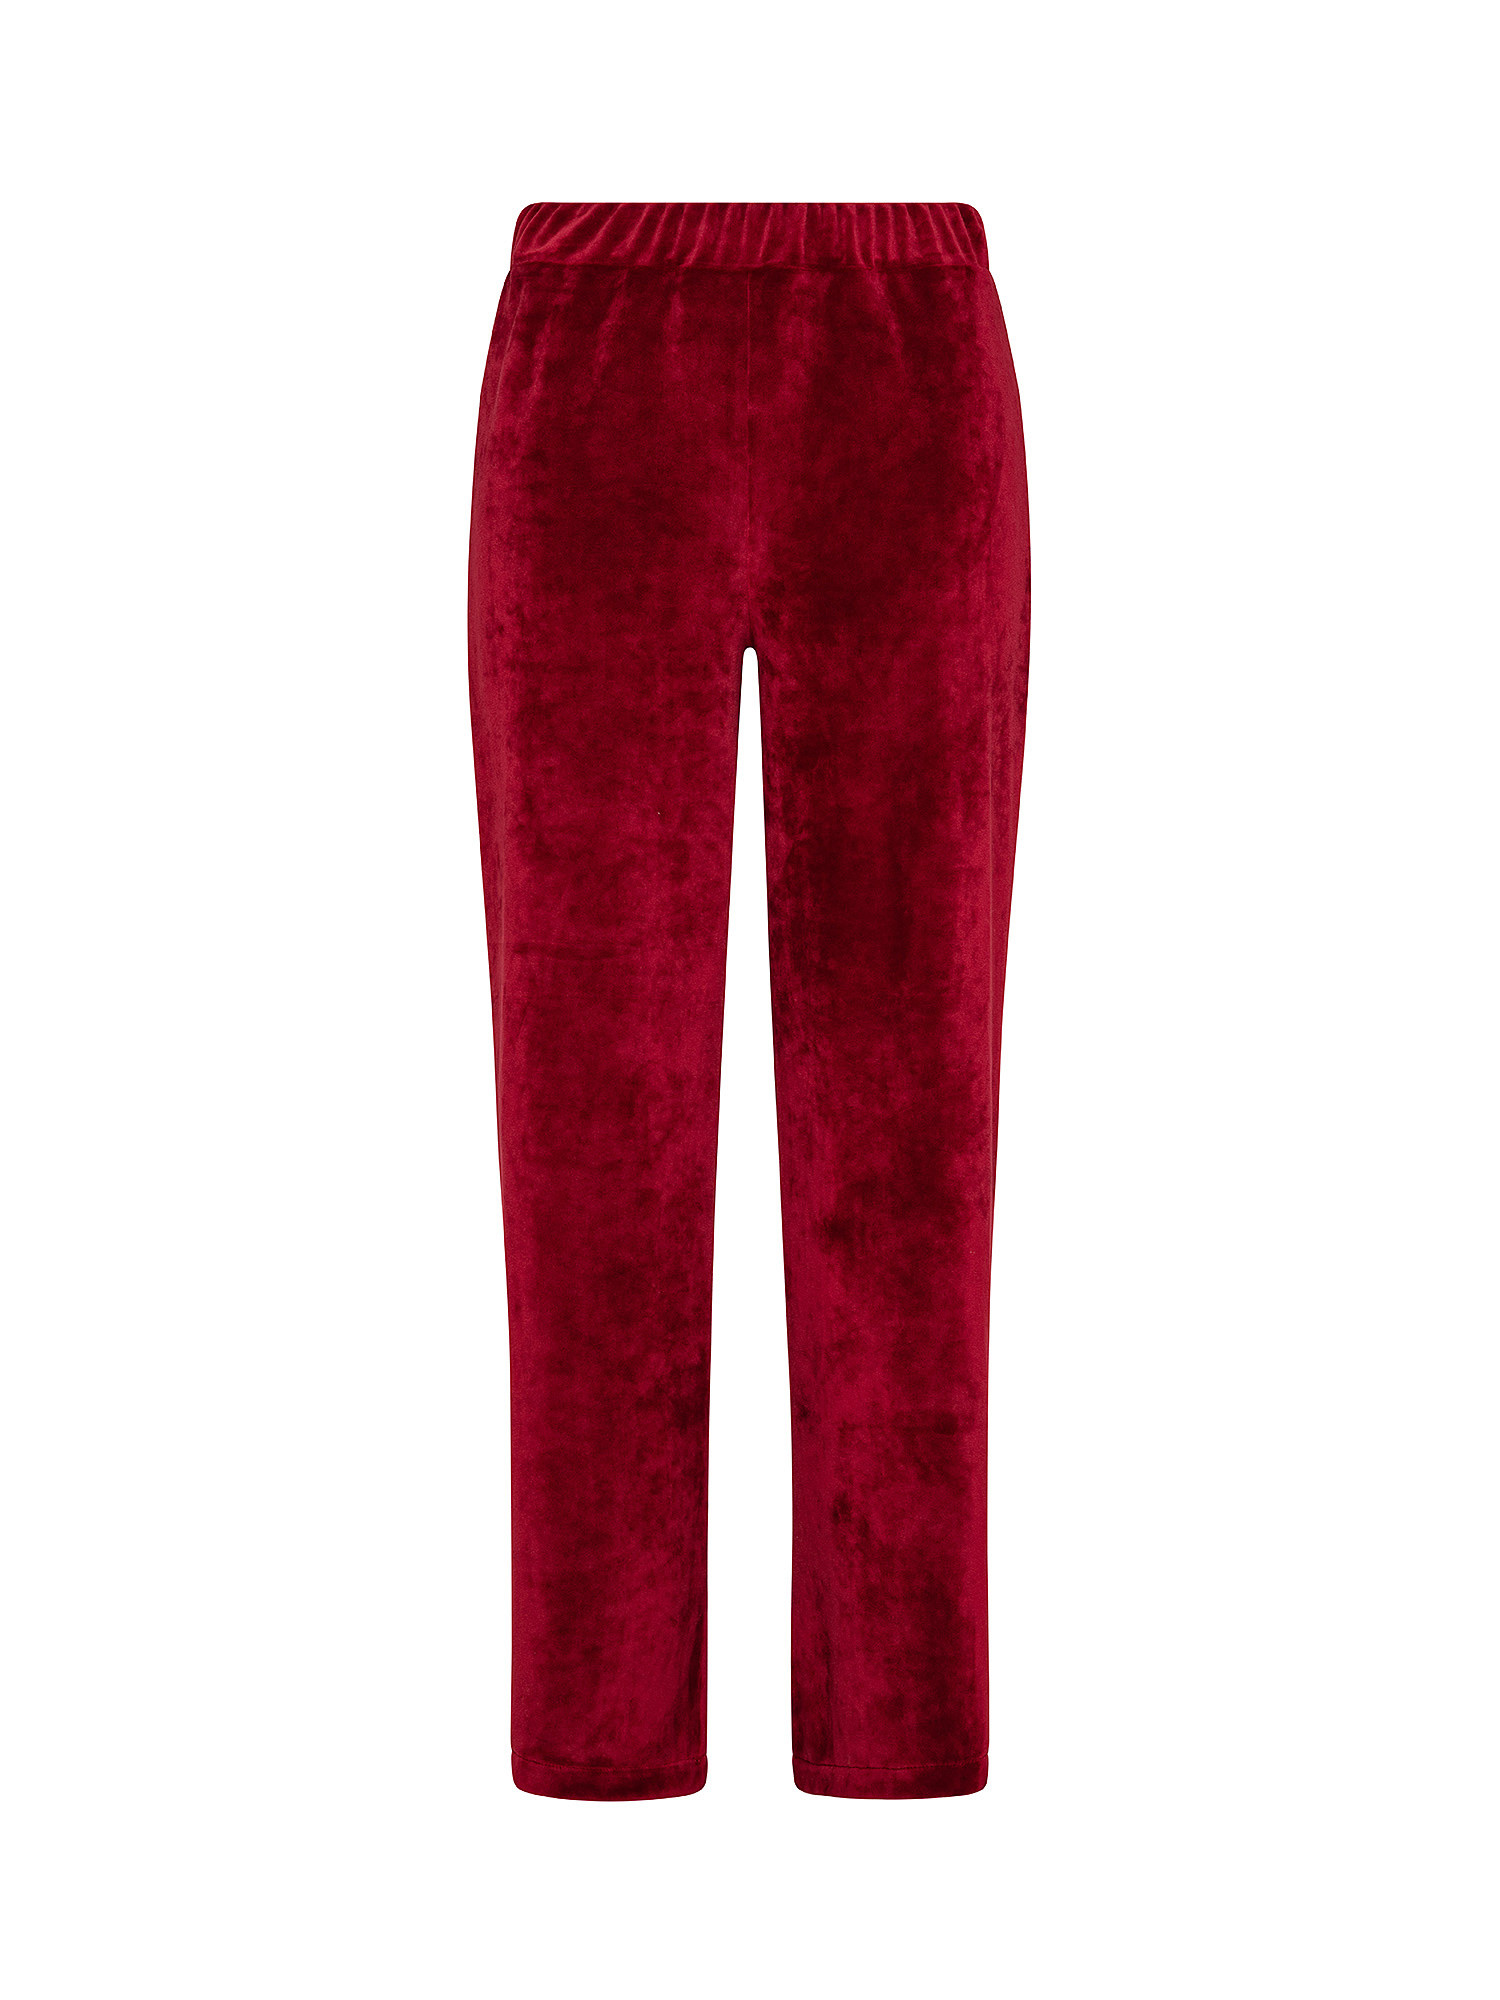 Chenille trousers, Red Bordeaux, large image number 0